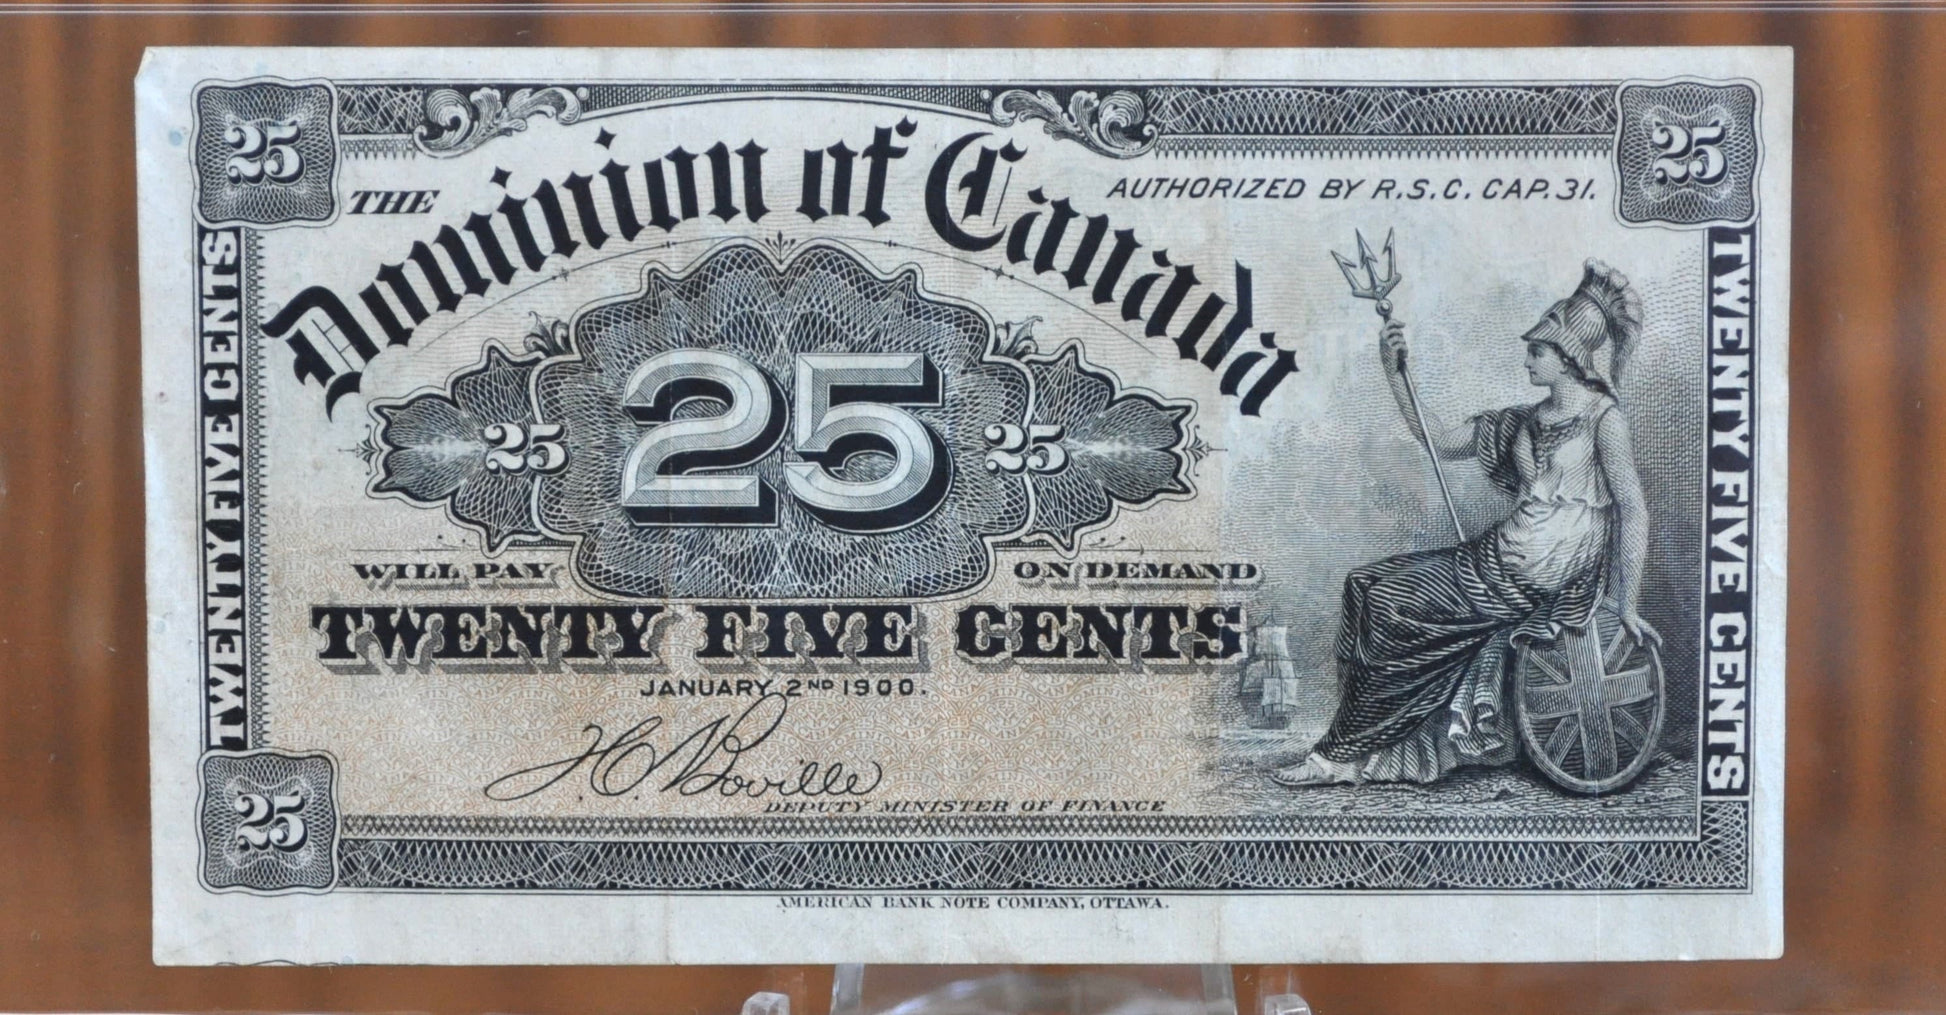 1900 25 Cent Fractional Note Dominion of Canada - 1900 Canadian Fractional Currency Twenty Five Cents - Great Design